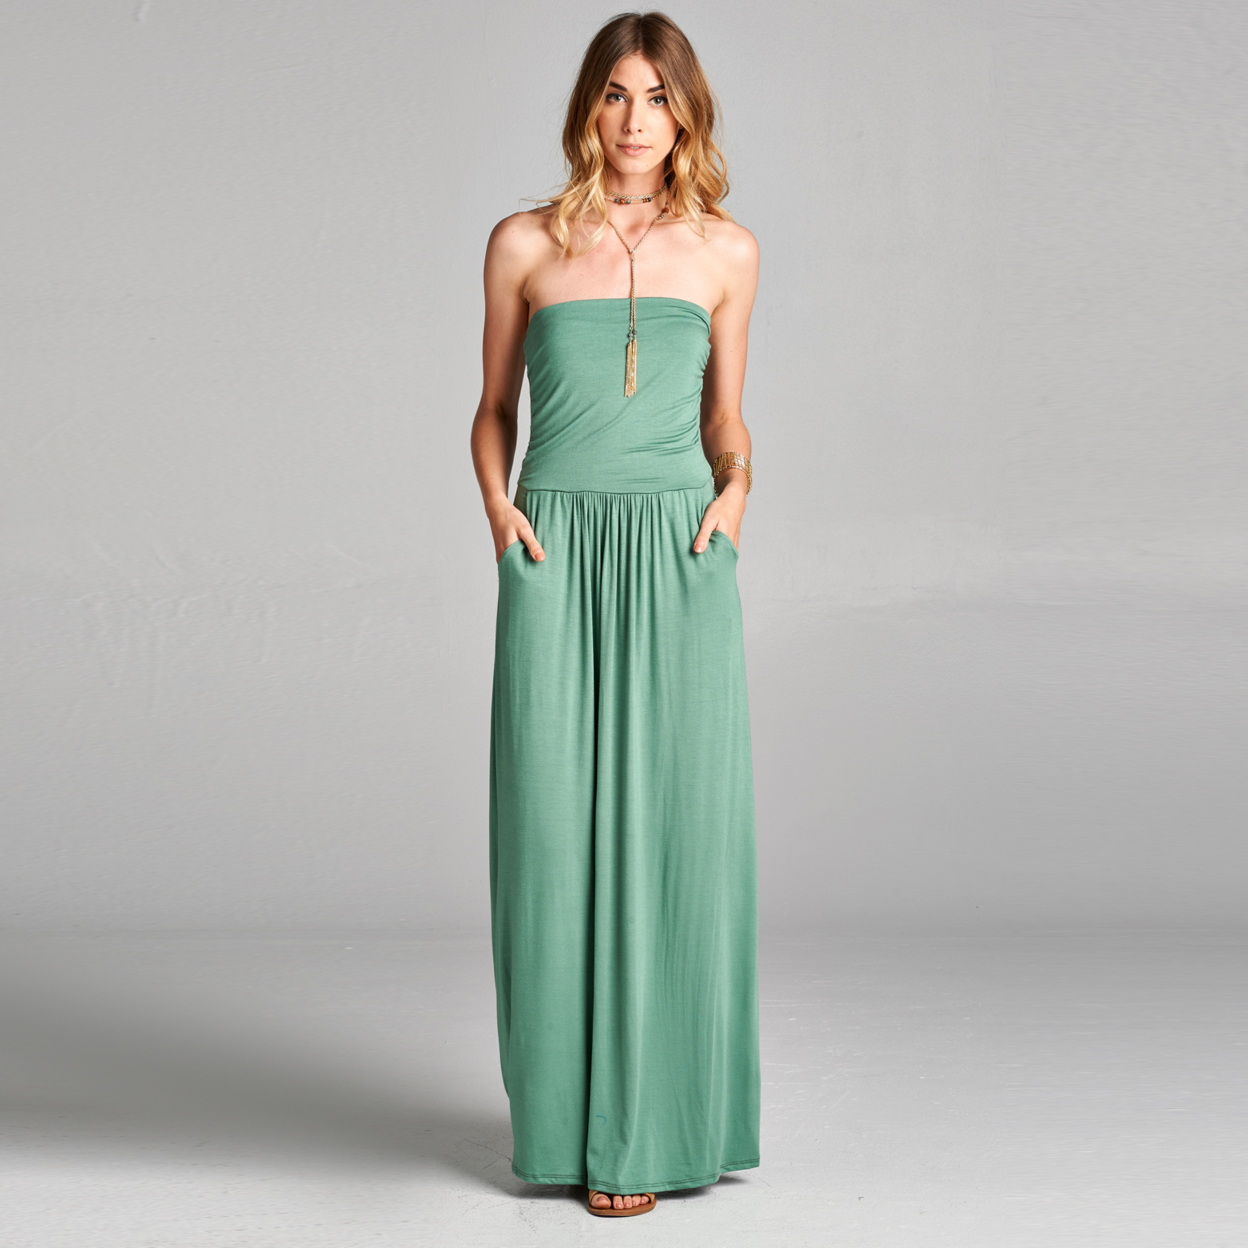 Atlantis Strapless Maxi Dress With Pockets In 6 Colors - Navy, Small (4-6)